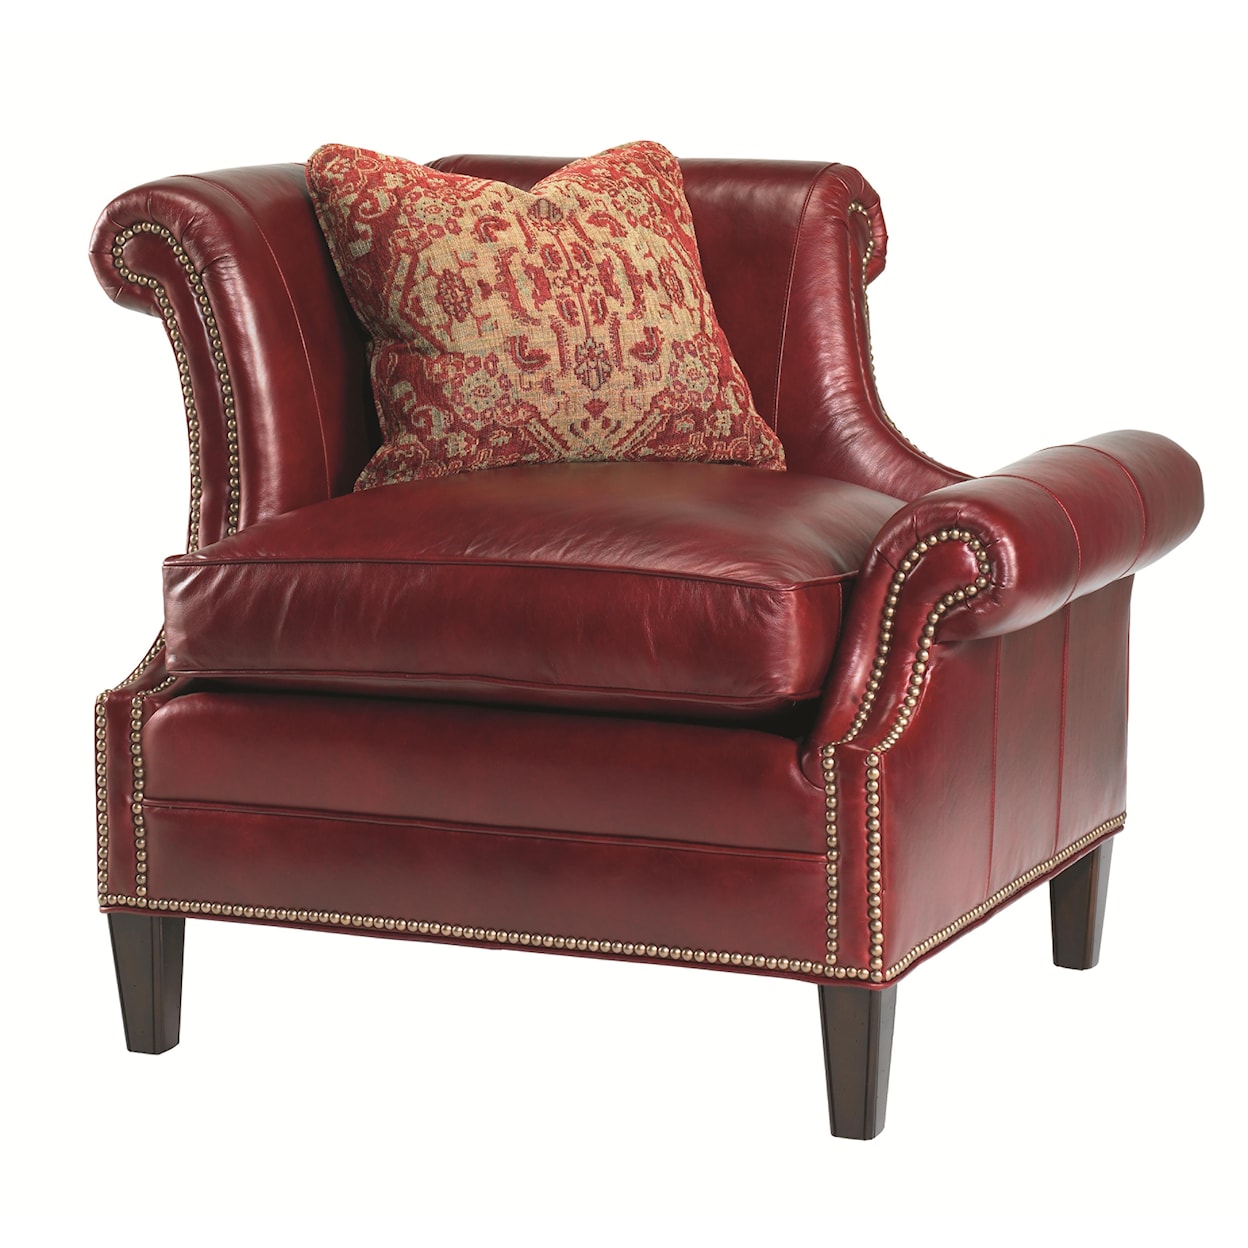 Lexington Leather Braddock Laf Upholstered Chair